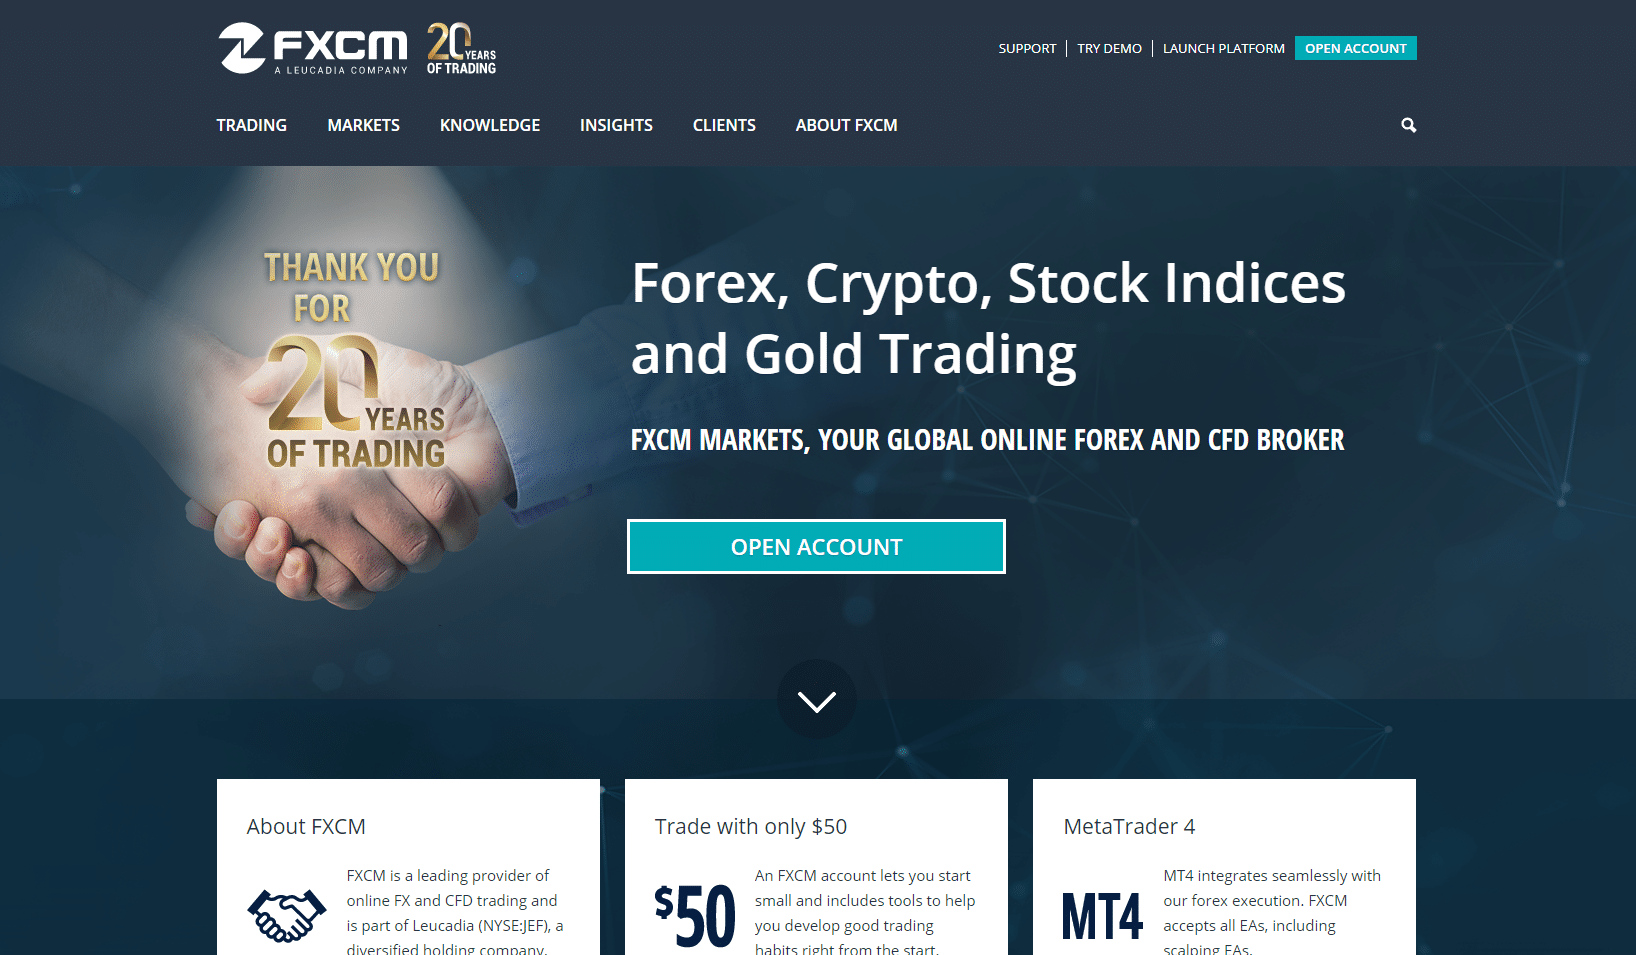 The official website of the forex broker FXCM